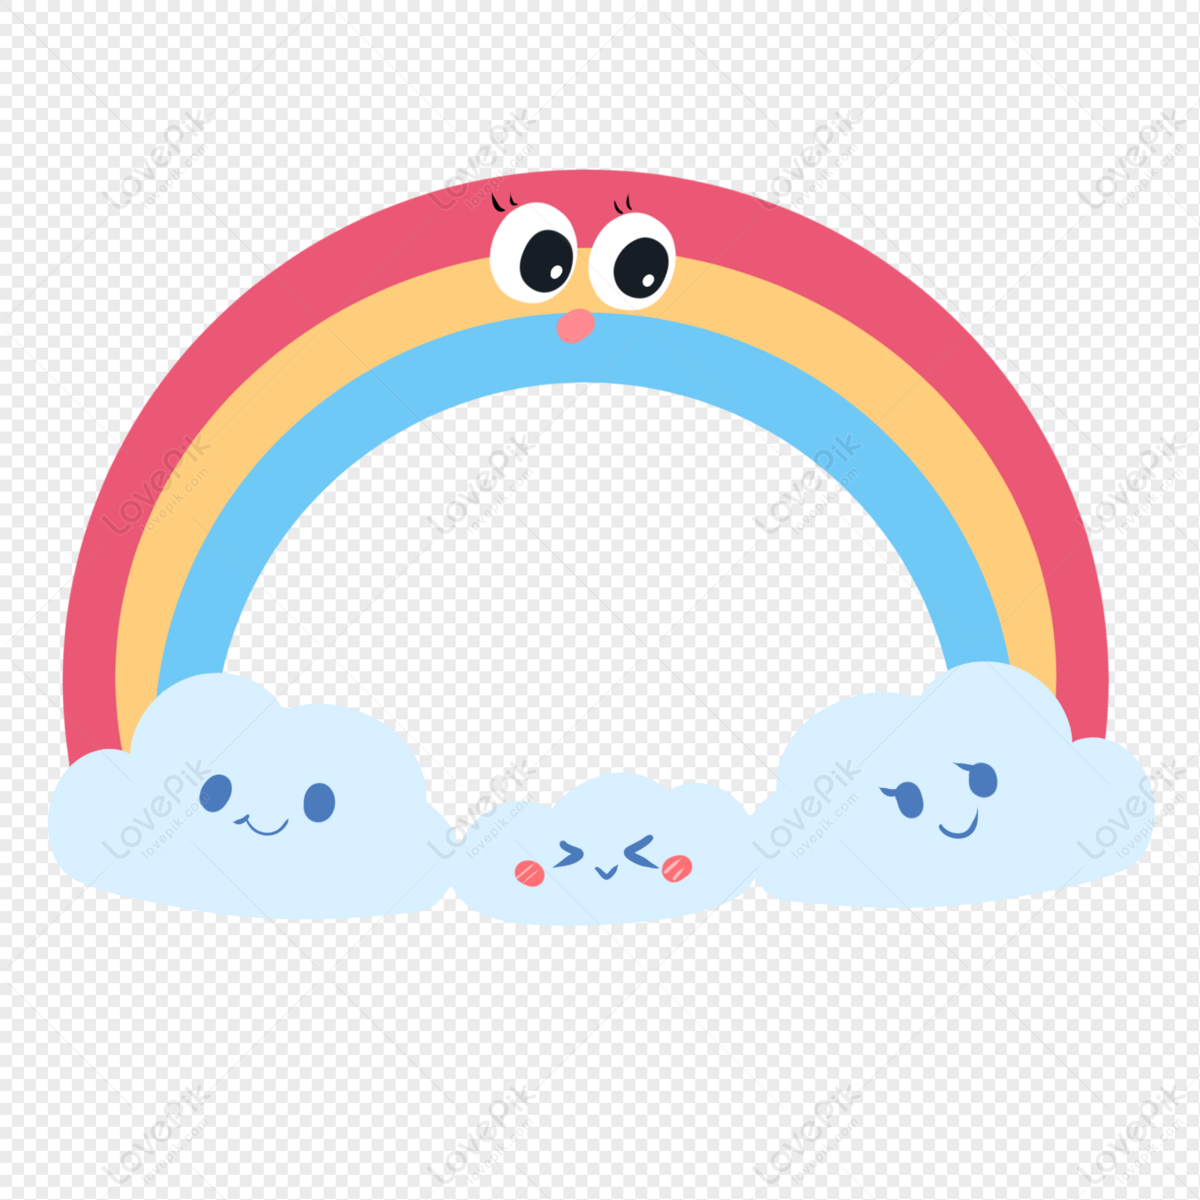 Rainbow Clouds Cartoon Shapes Sticky Notes 